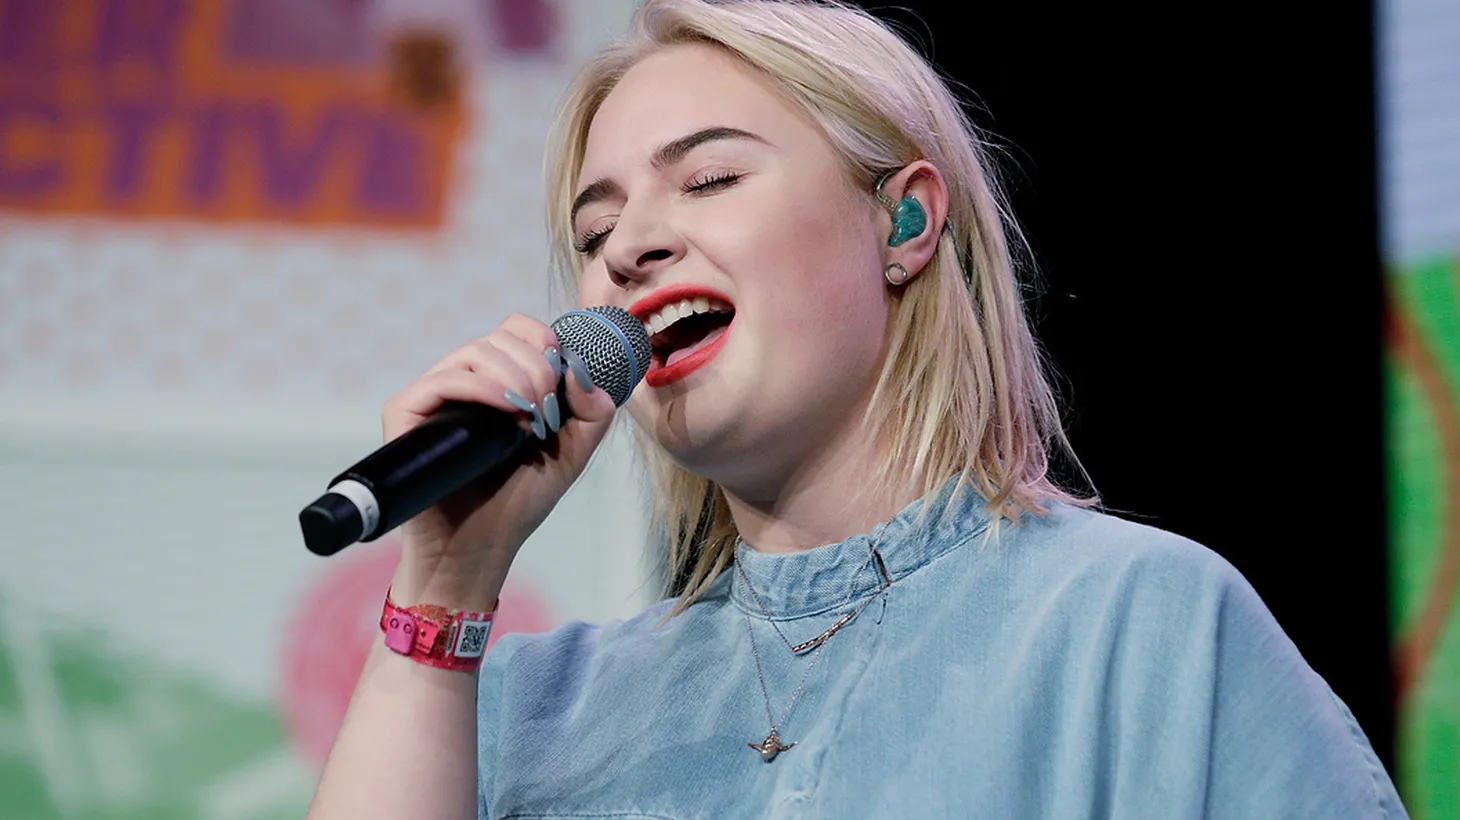 Liverpool singer Lapsley played a powerhouse set for us at SXSW this year and was awarded the festival's prize for "Developing Non-US Act."